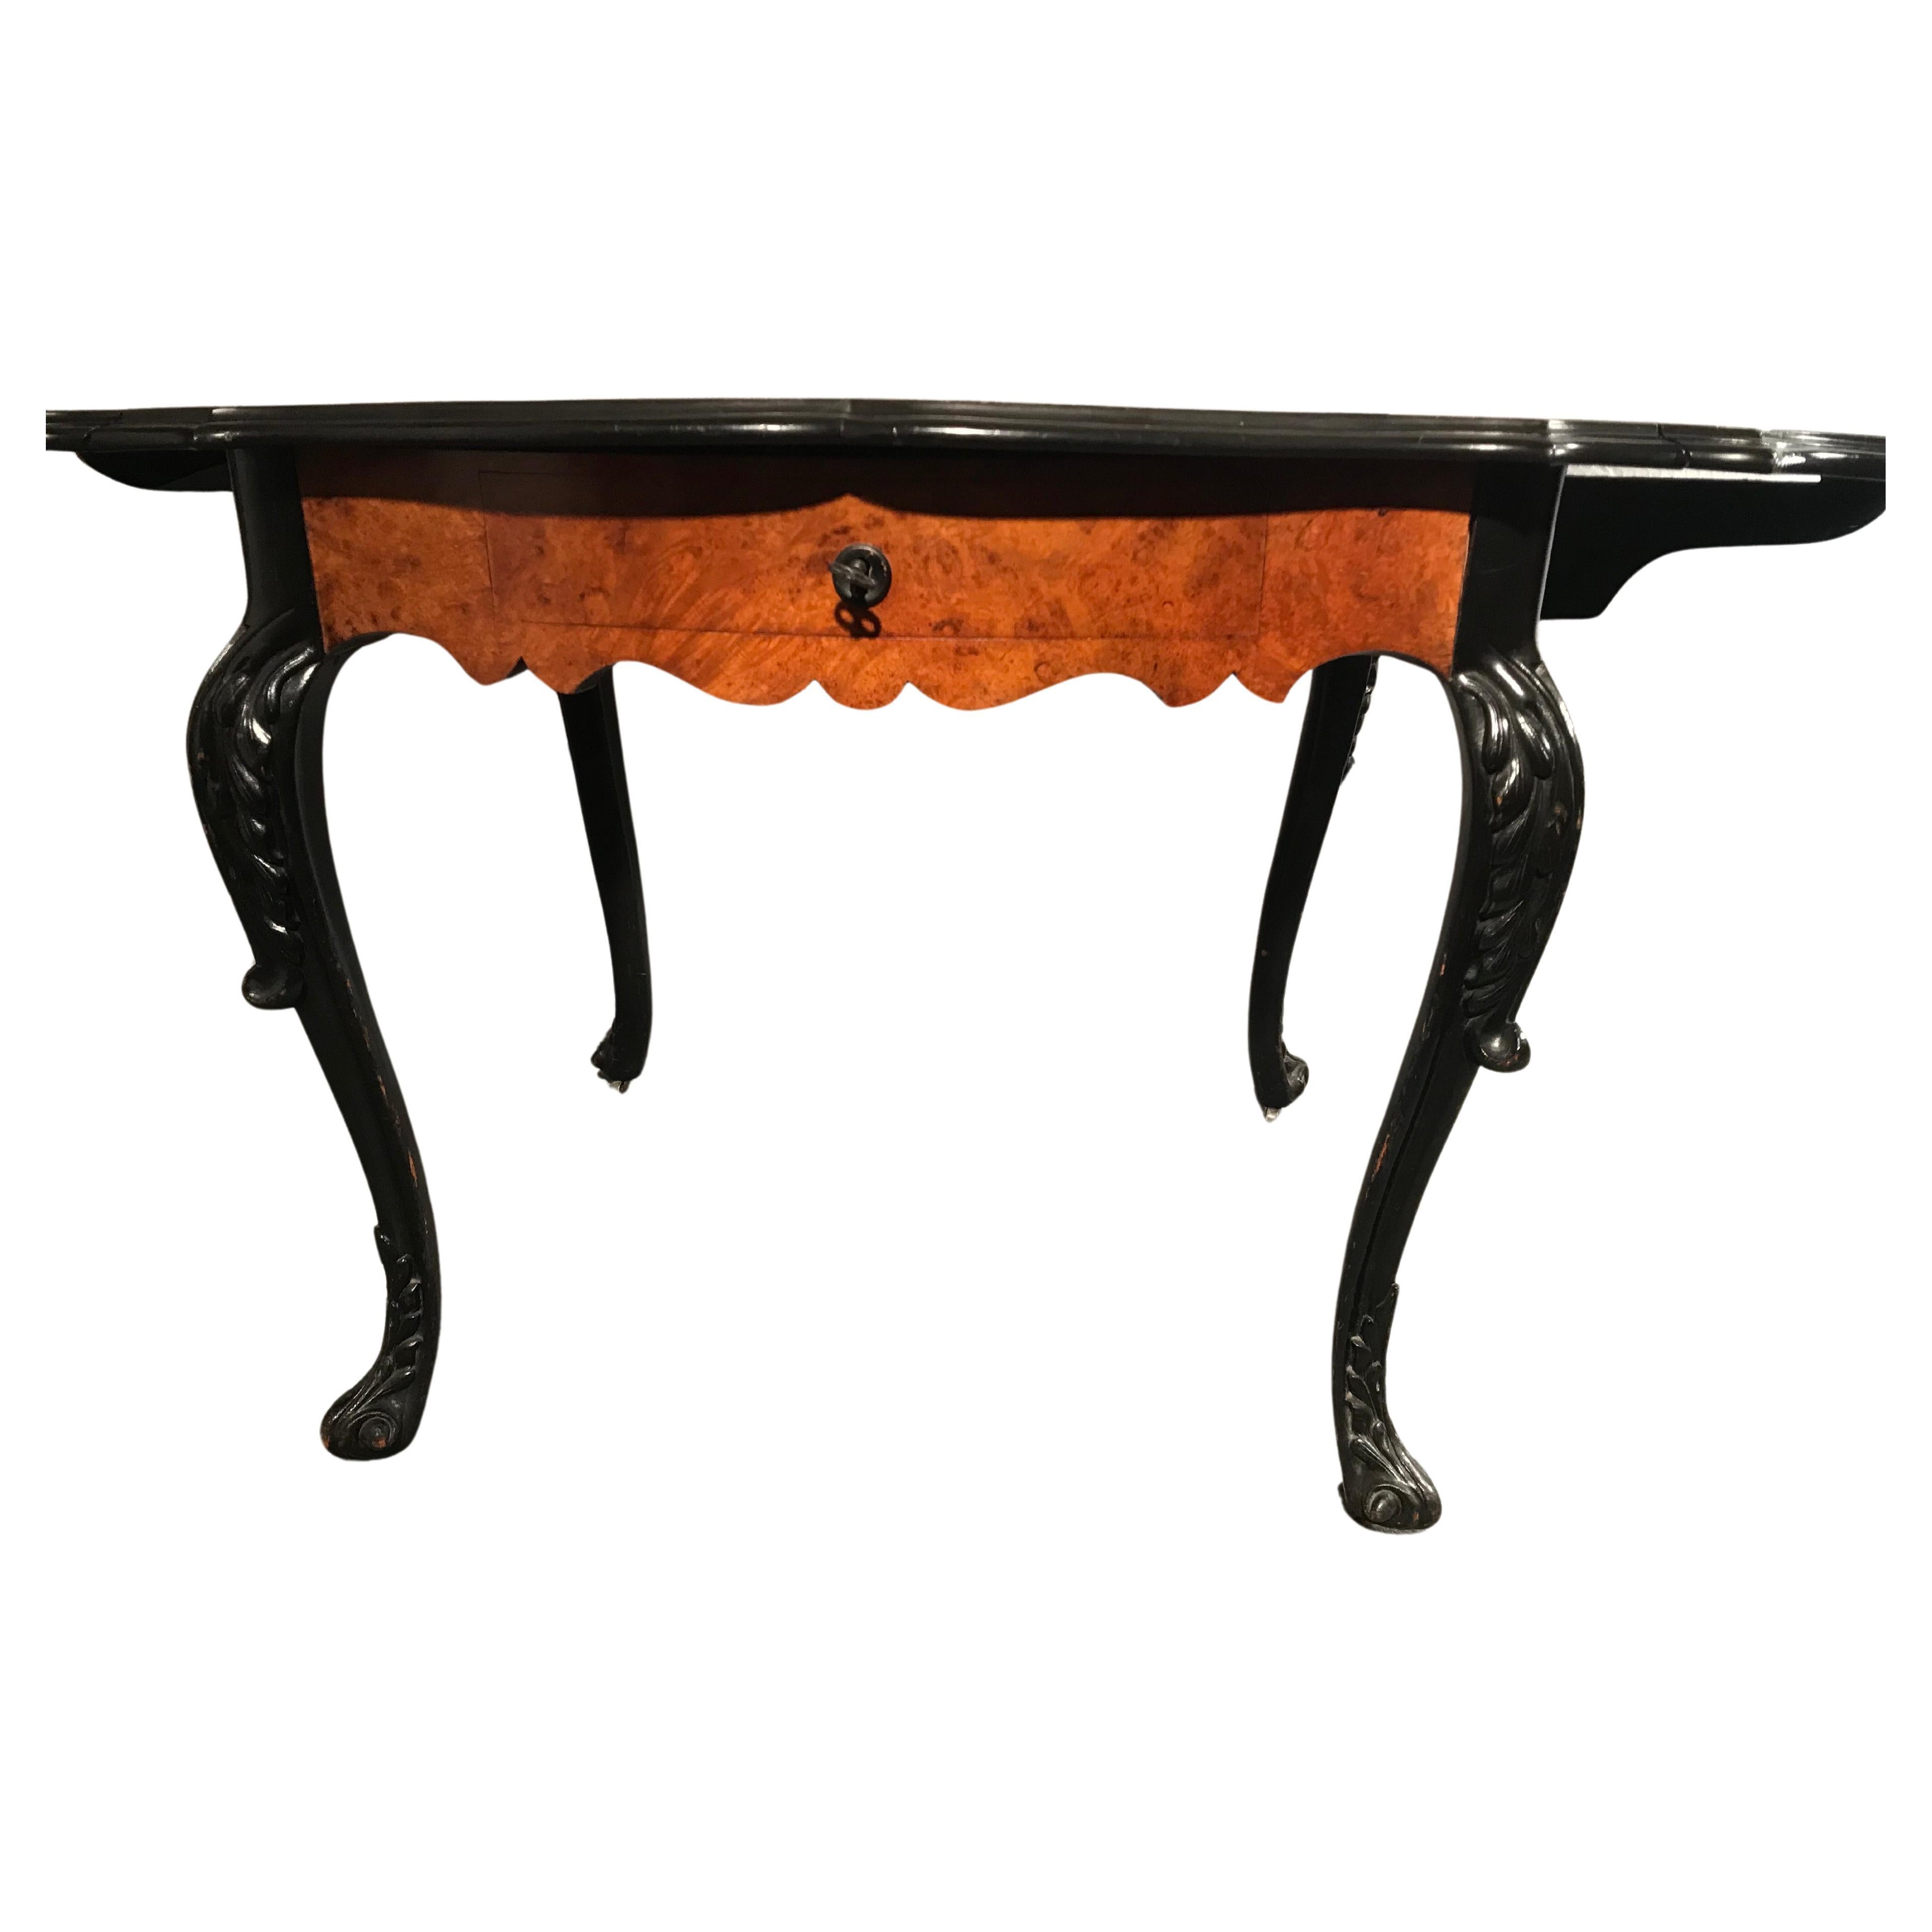 Discover an extraordinary side table or desk that traces its origins to the period between 1860 and 1870, originating from the artistic craftsmanship of Belgium. This unique piece stands gracefully on four curved legs adorned with hand-carved